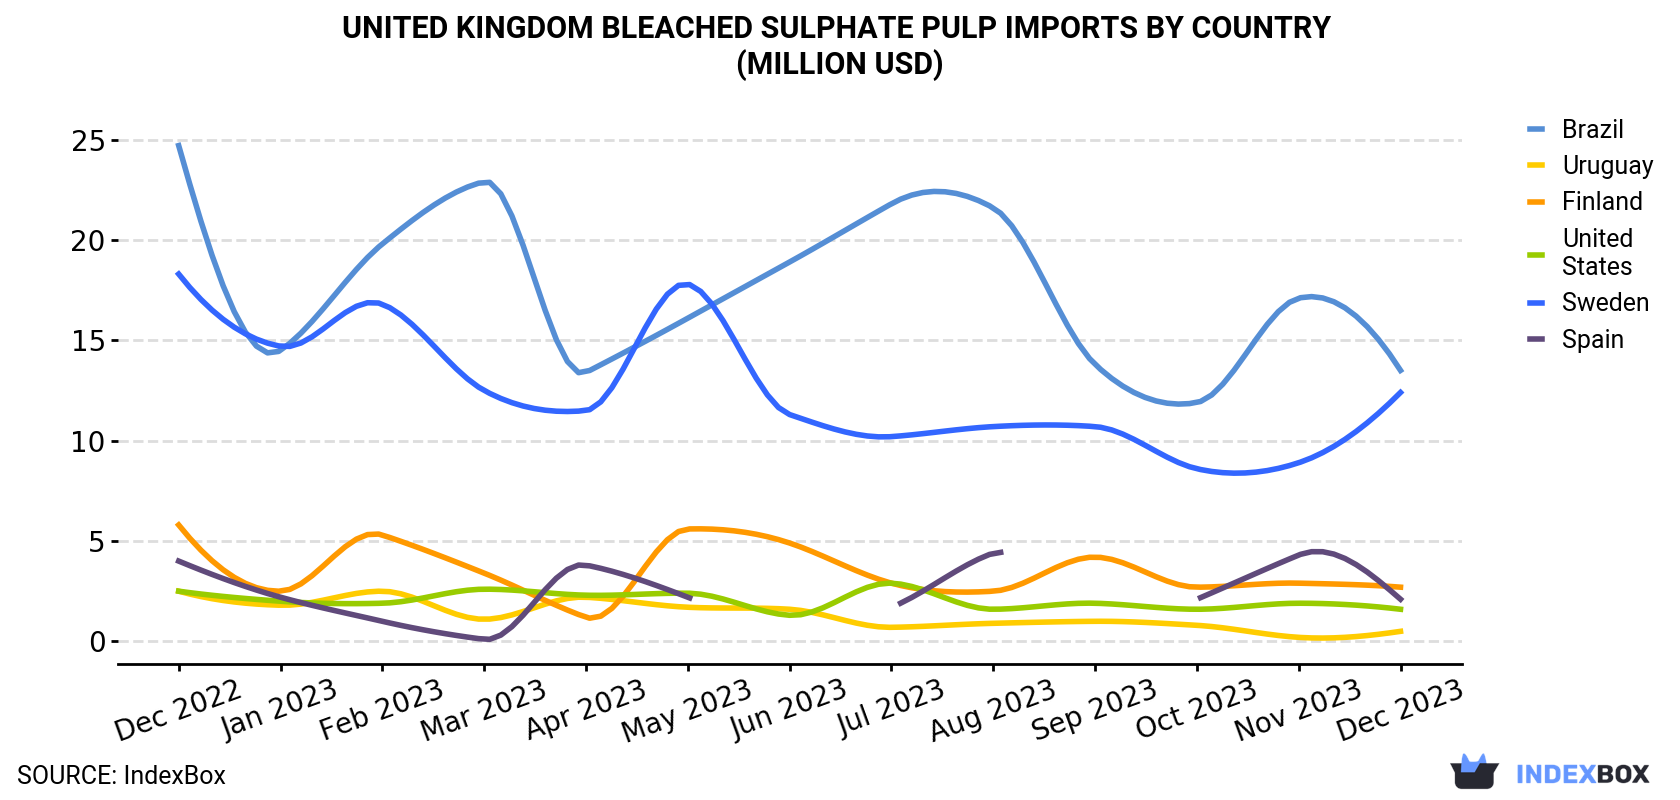 United Kingdom Bleached Sulphate Pulp Imports By Country (Million USD)